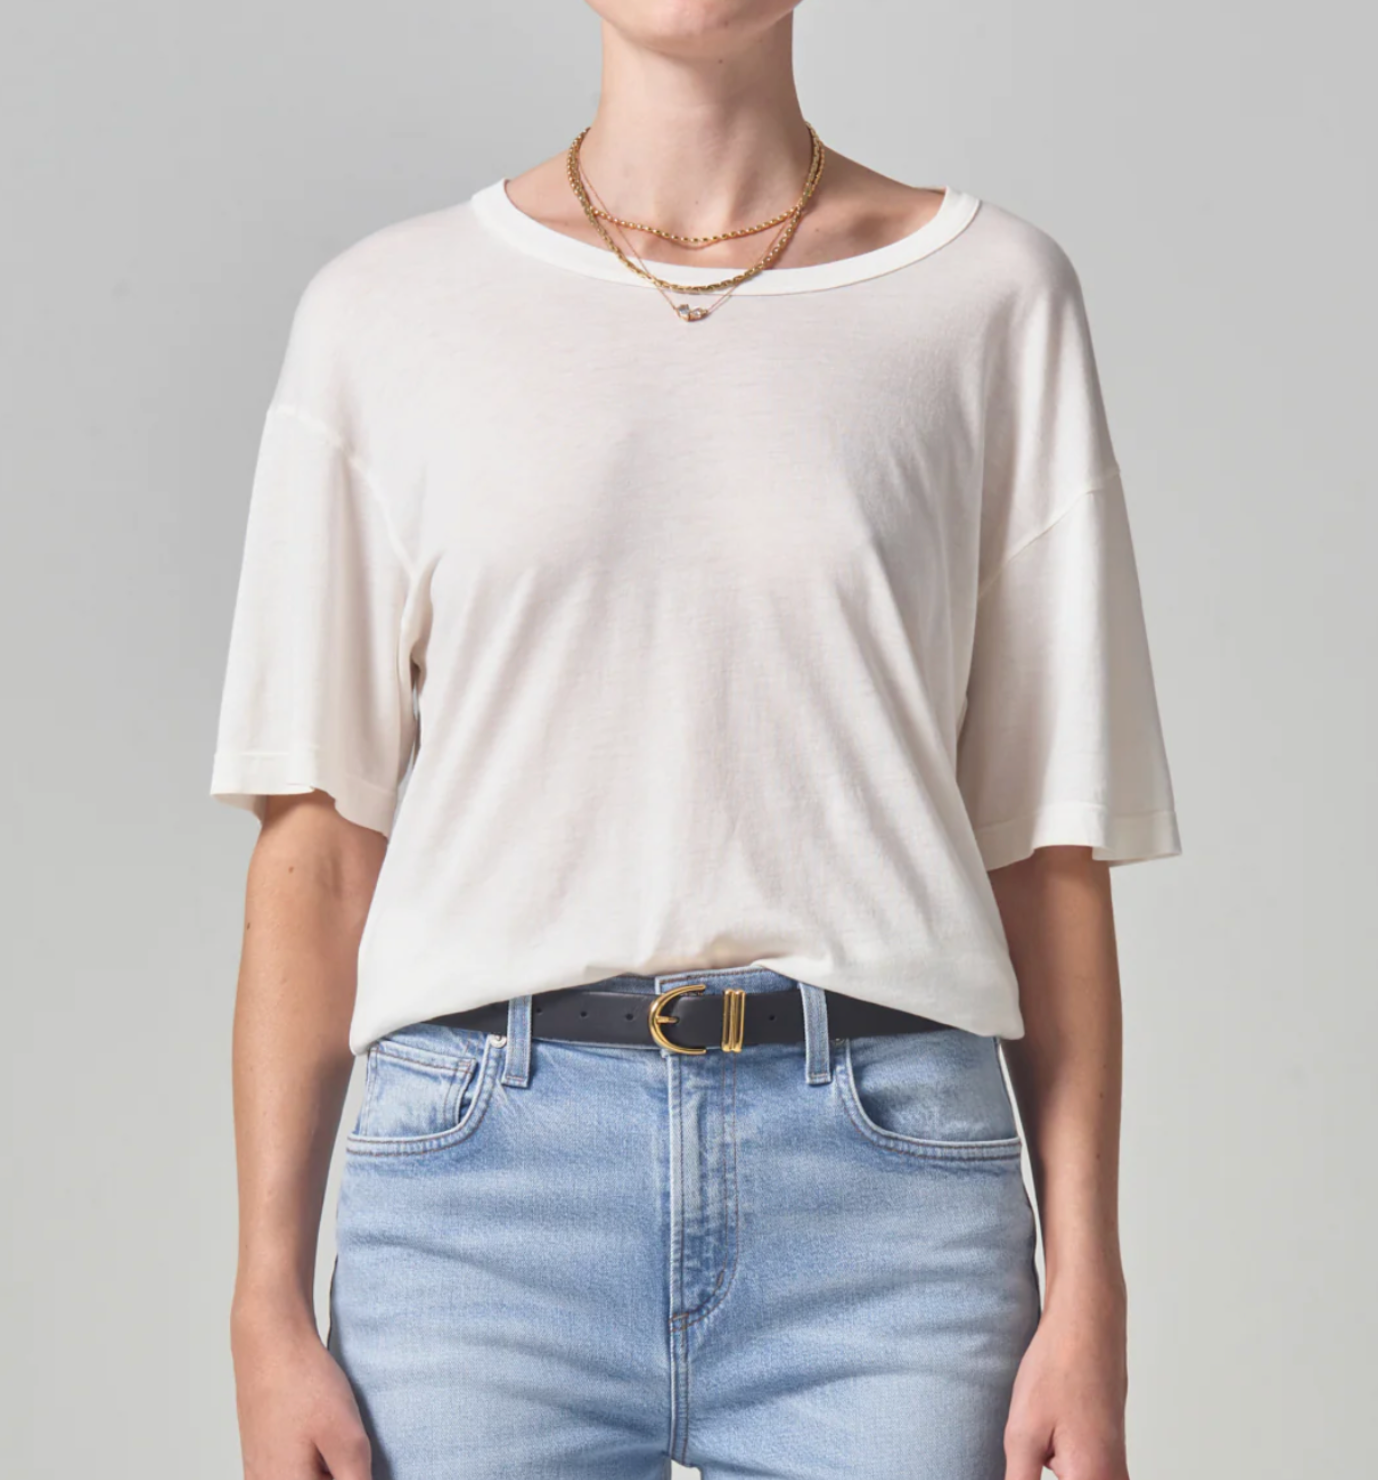 A person styled in a Citizens Of Humanity/AGOLDE Elisabetta Relaxed Tee In Pashmina and light blue jeans with a black belt, cropped at the neck so only the torso is visible. A gold necklace is also visible.